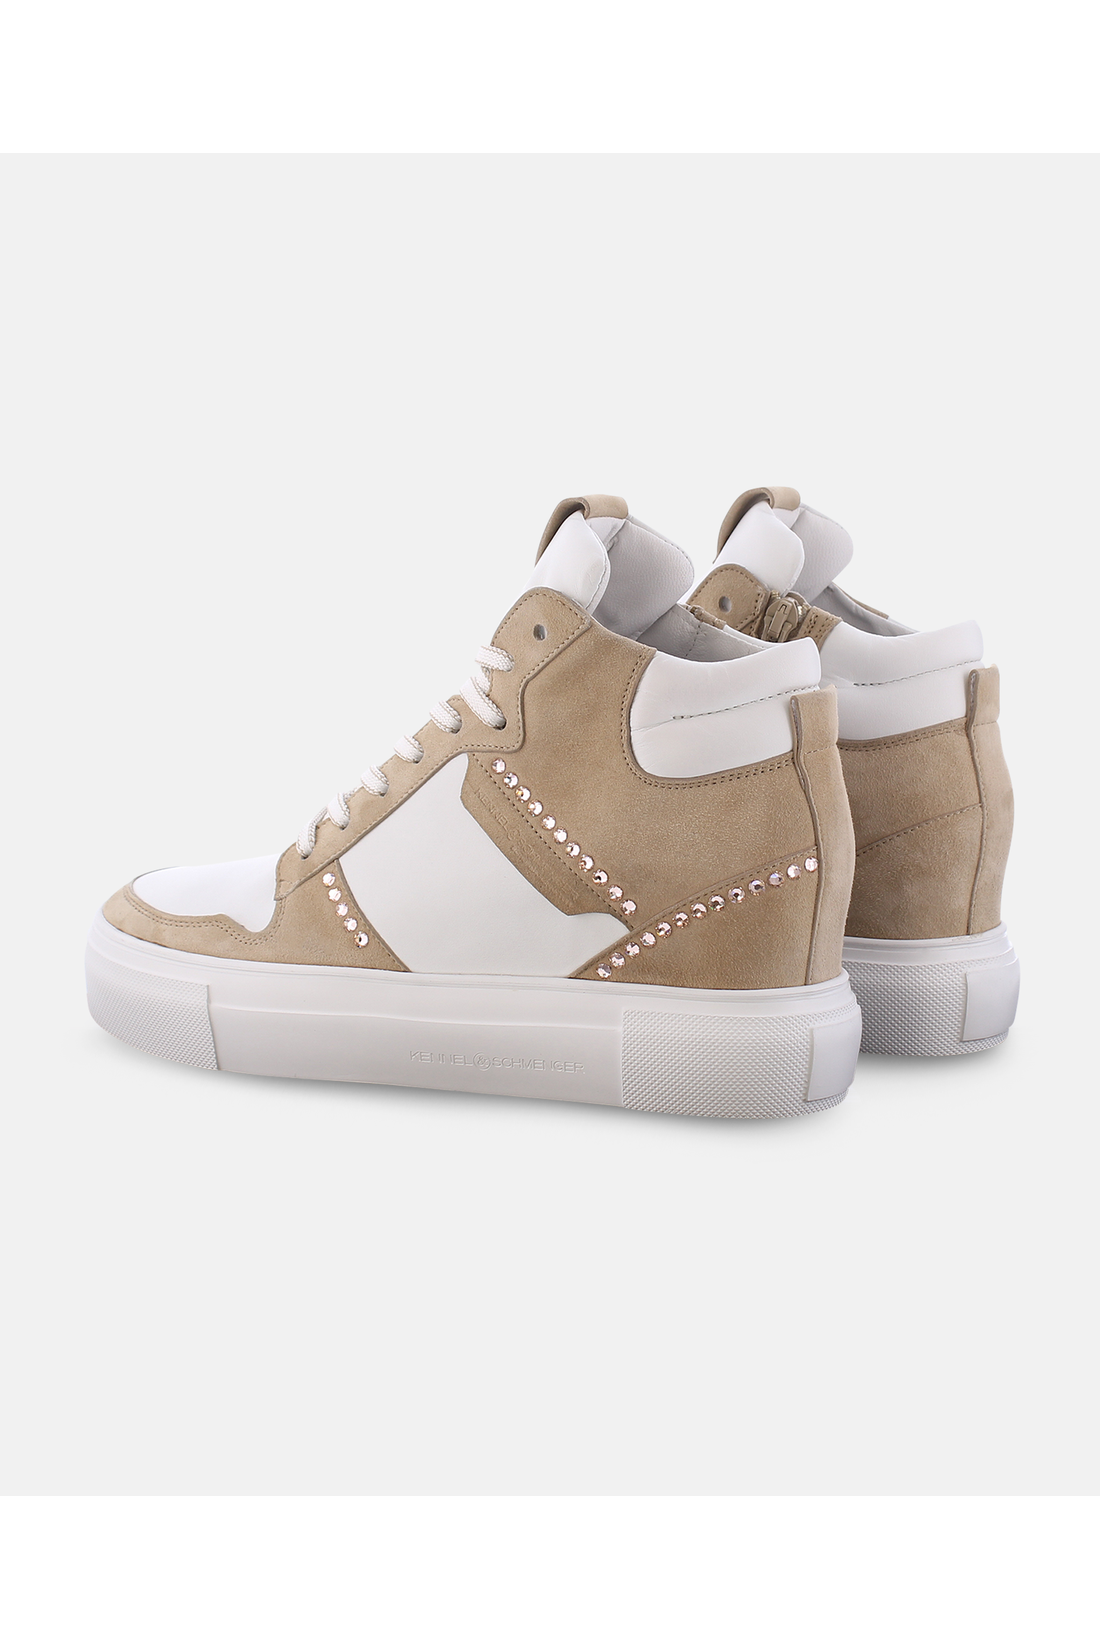 Kennel-Schmenger-OUTLET-SALE-CHAMP-Sneakers-ARCHIVE-COLLECTION-2.png